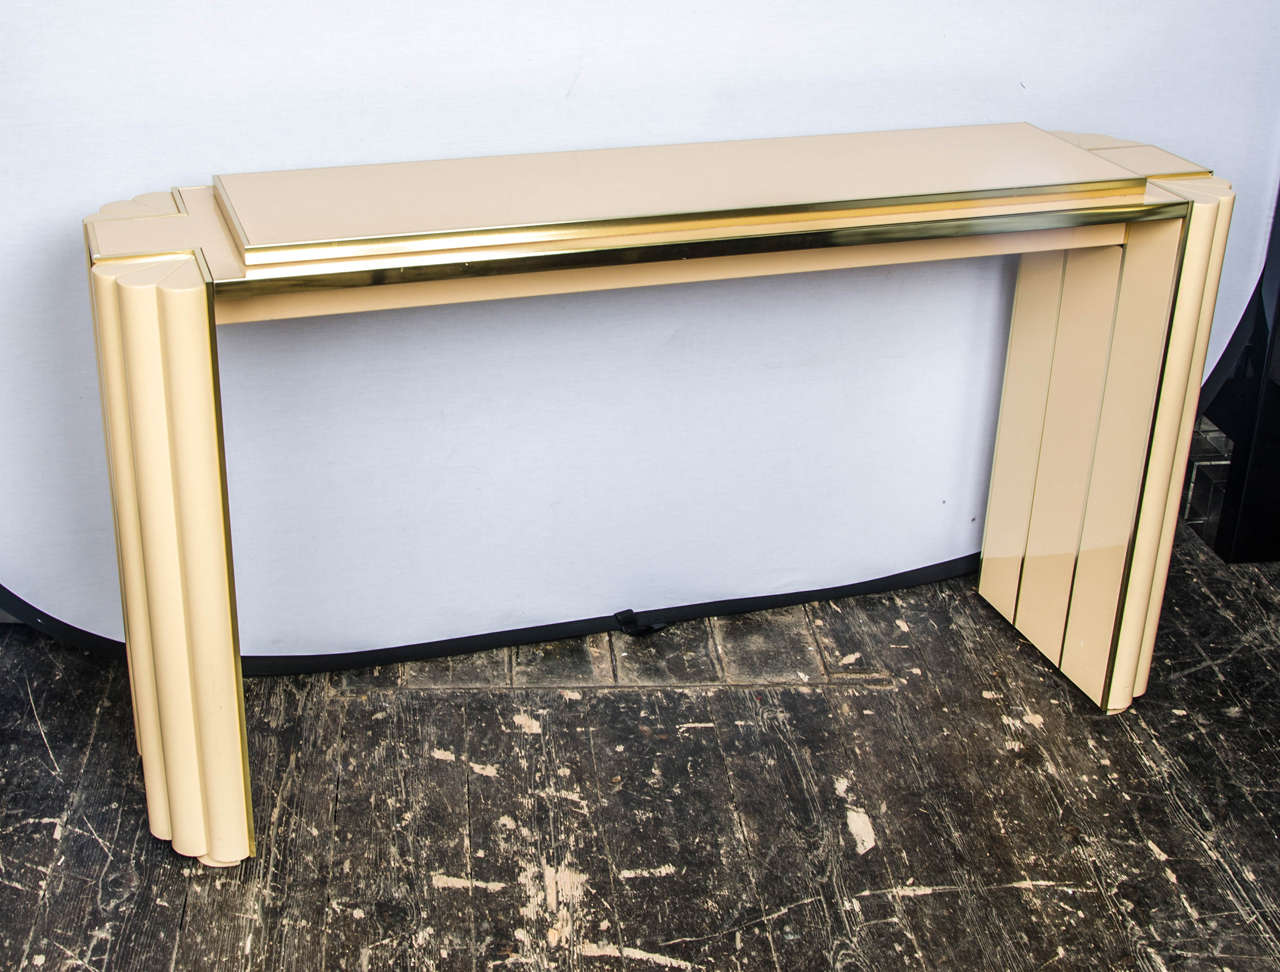 1970s French console in lacquered wood by Alain Delon for Maison Jansen signed on the side.